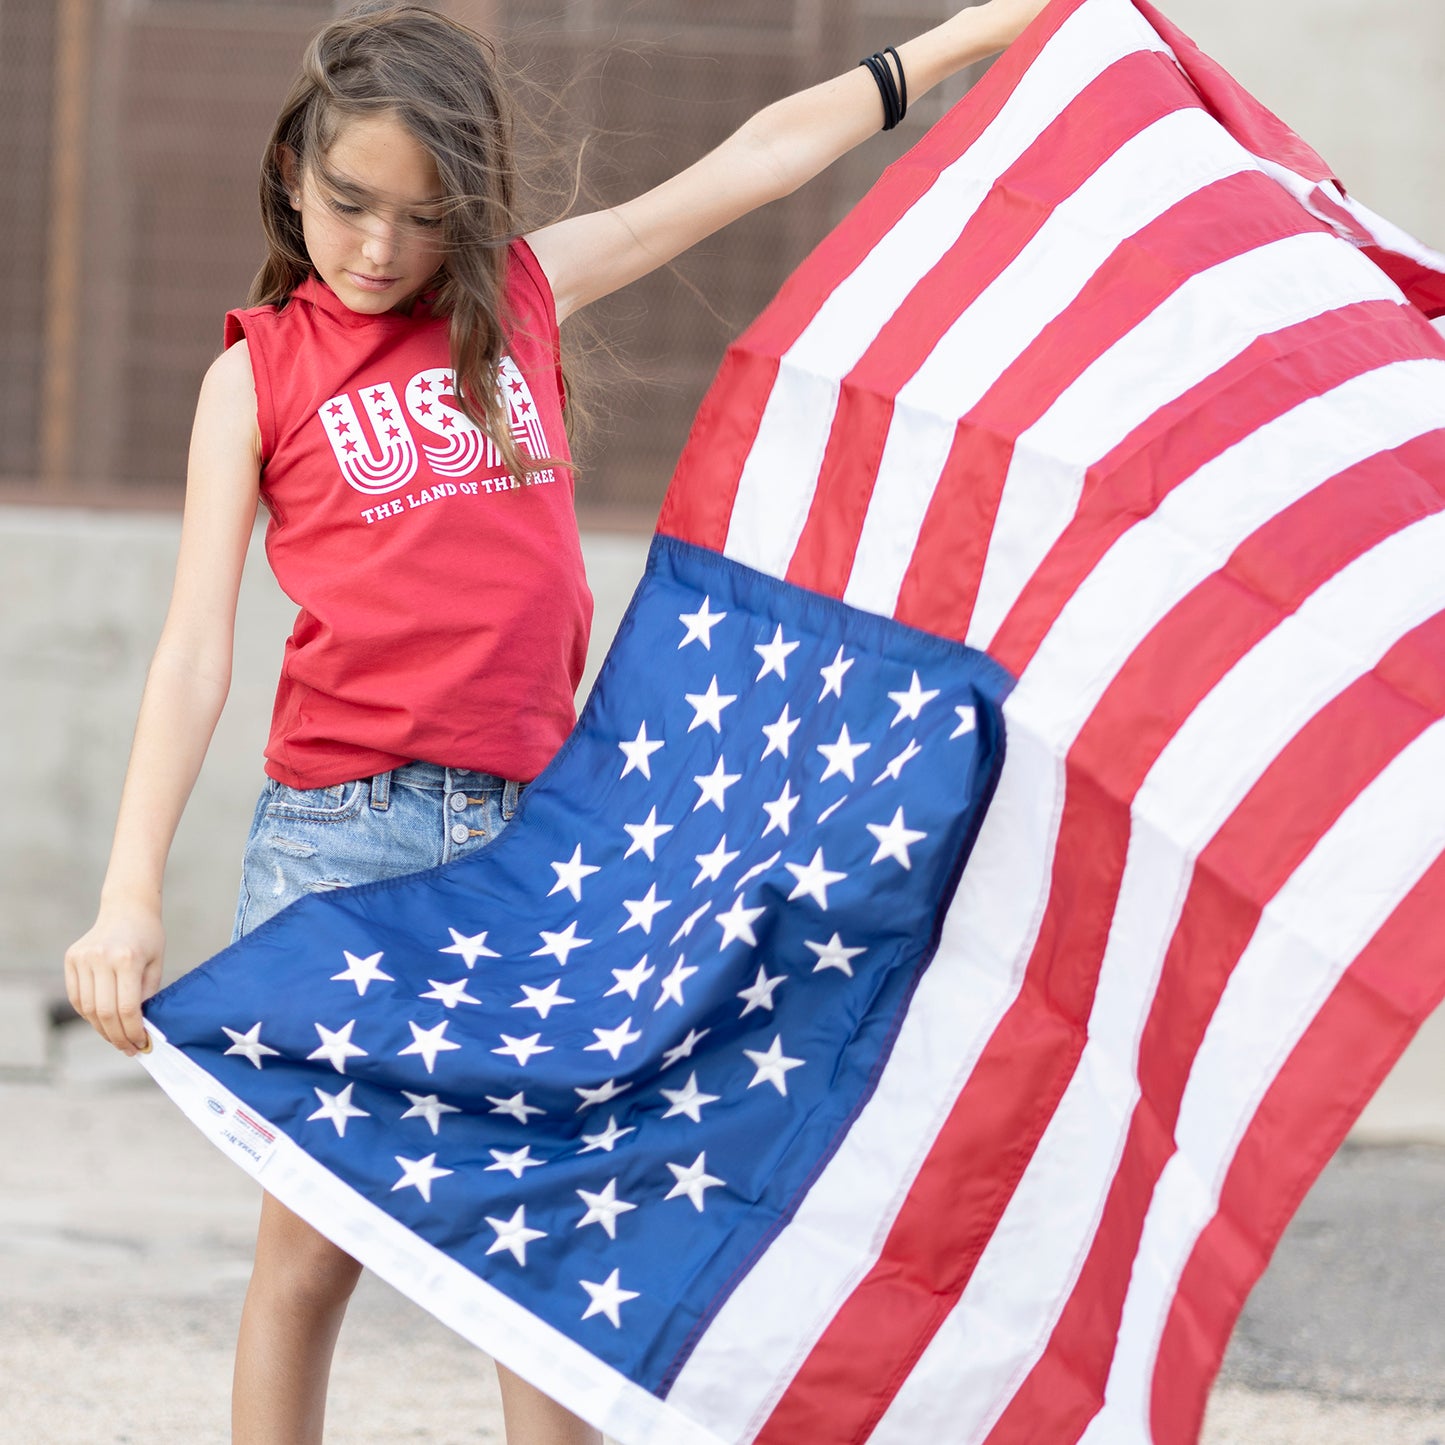 USA, THE LAND OF THE FREE Red Short Sleeve Kids Teen T-shirt FABVOKAB